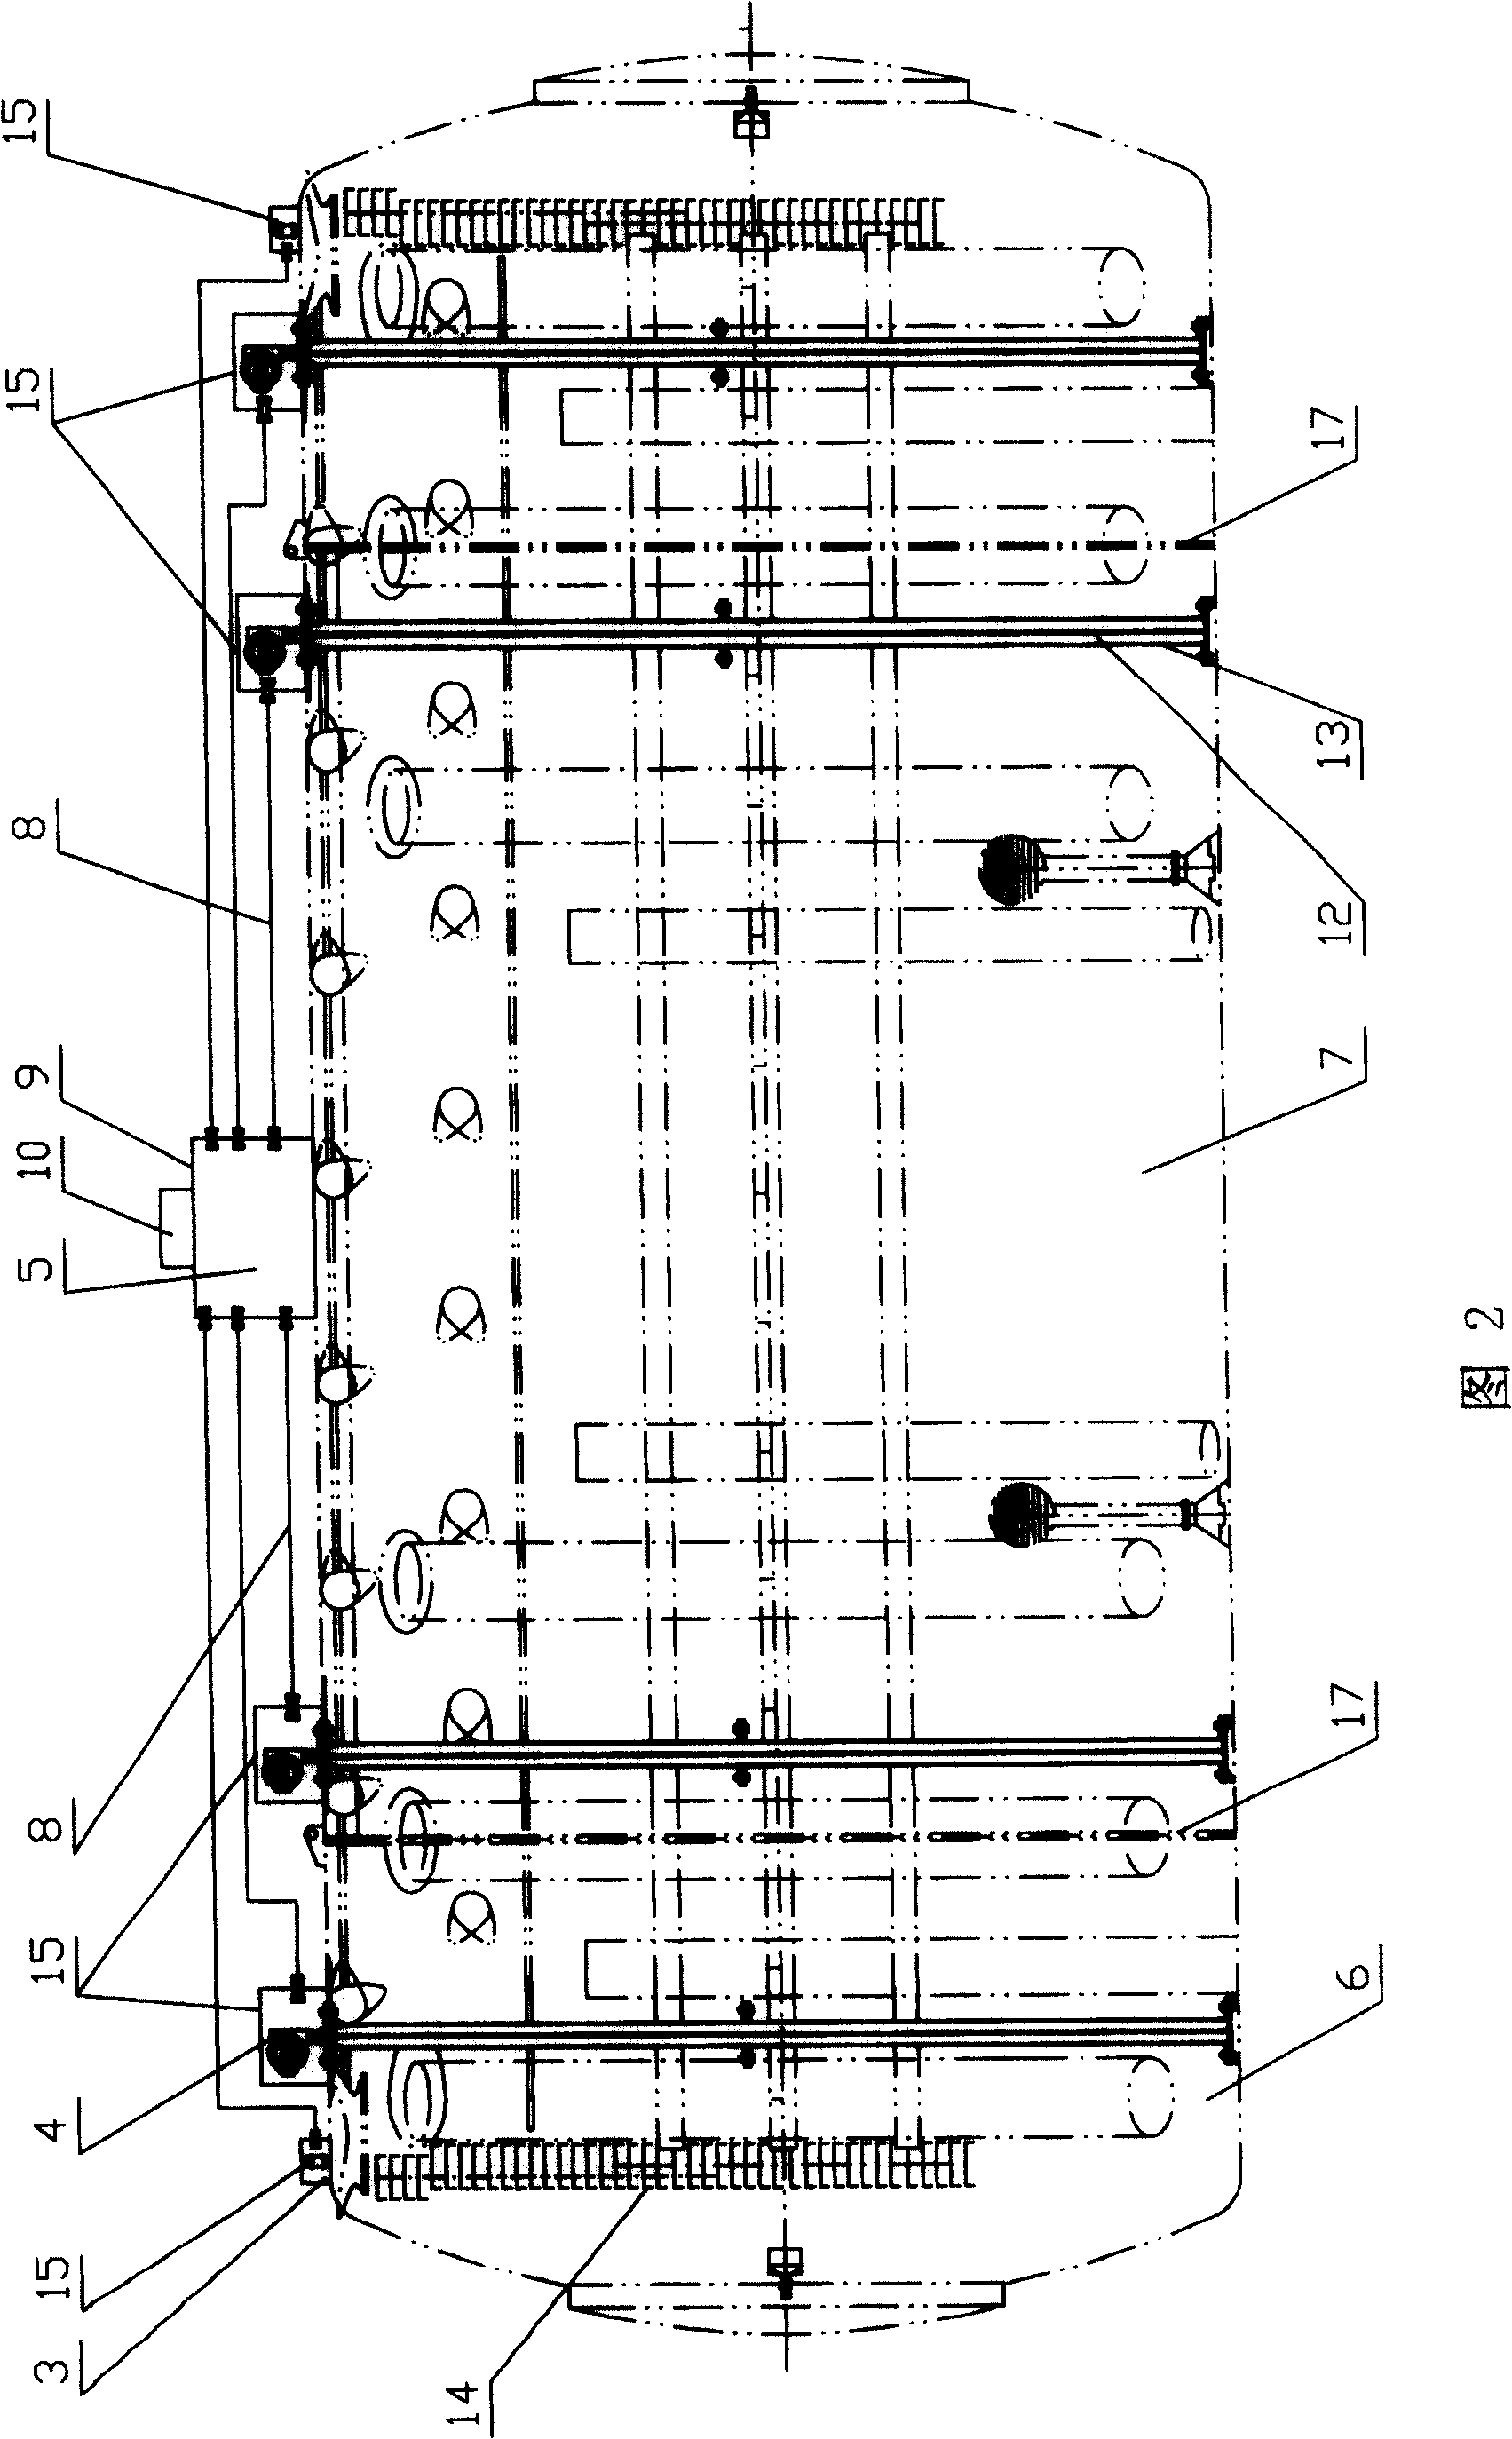 System and method for inspecting liquid level of buoy